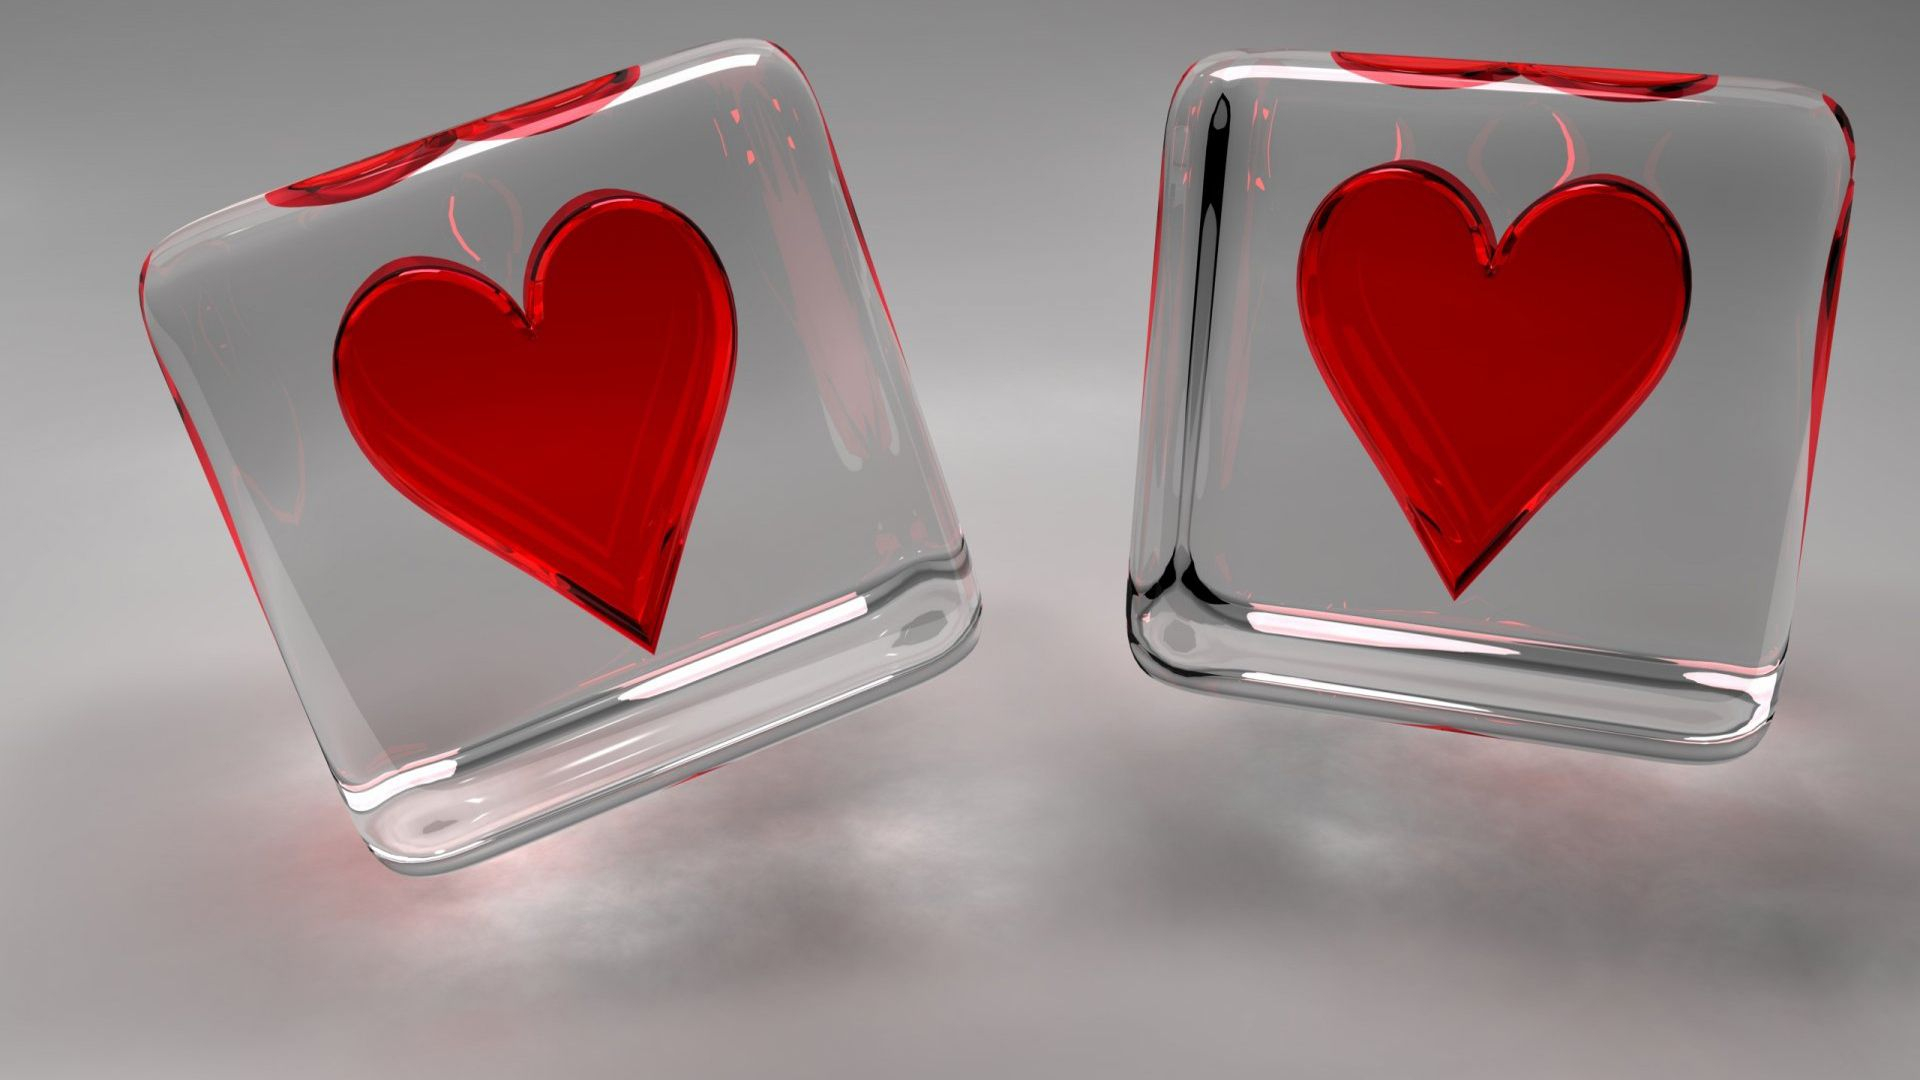 Love Forever Images Hd - Love Heart Images Hd Download - HD Wallpaper 